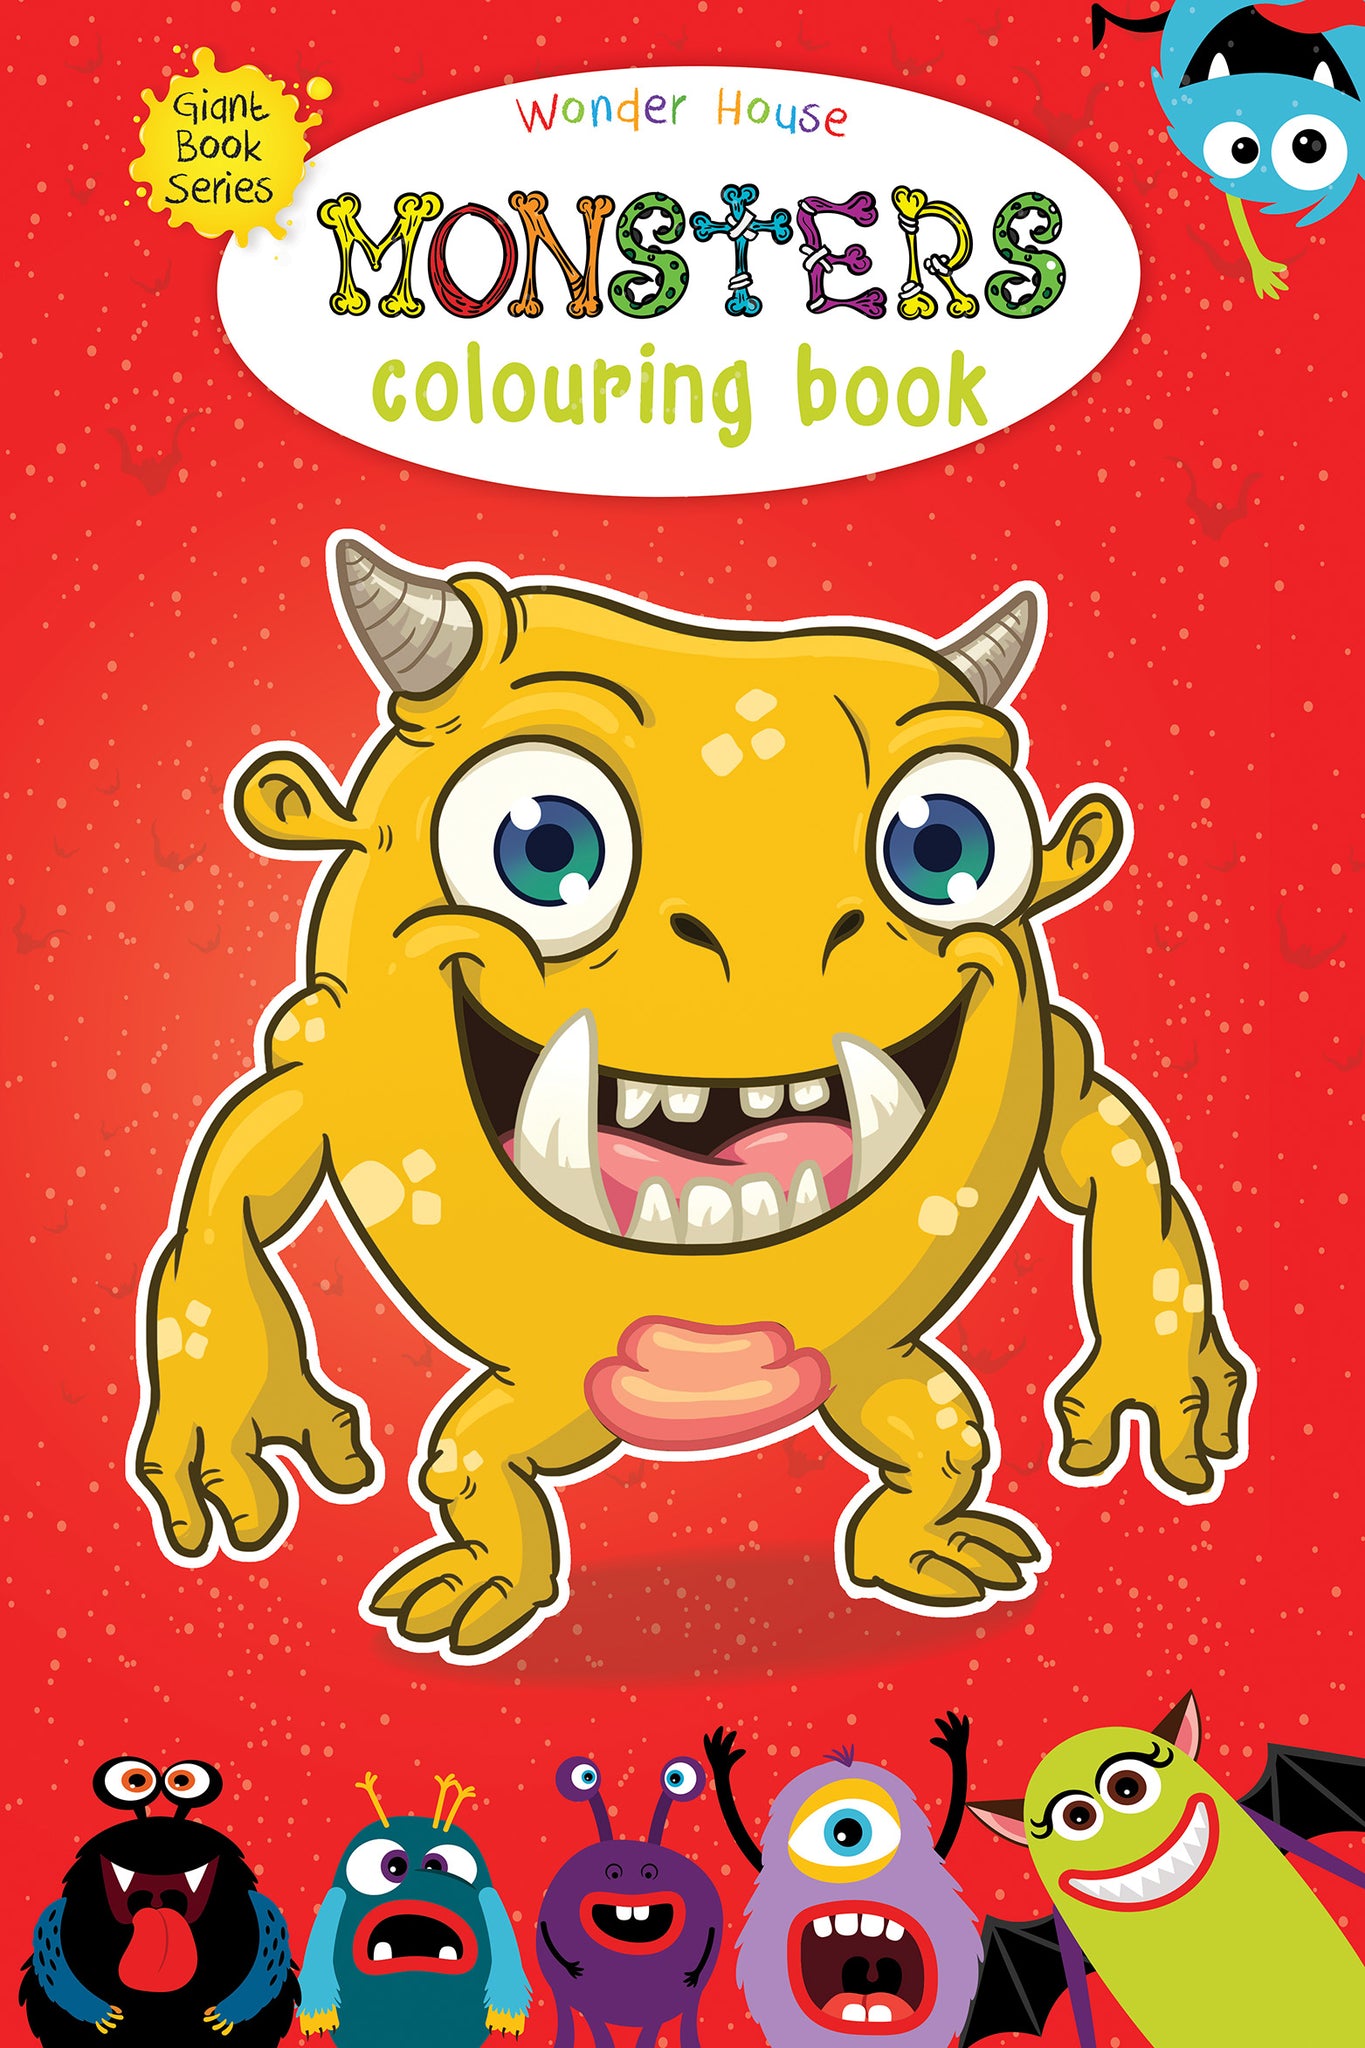 Monster Colouring Book (Giant Book Series): Jumbo Sized Colouring Books